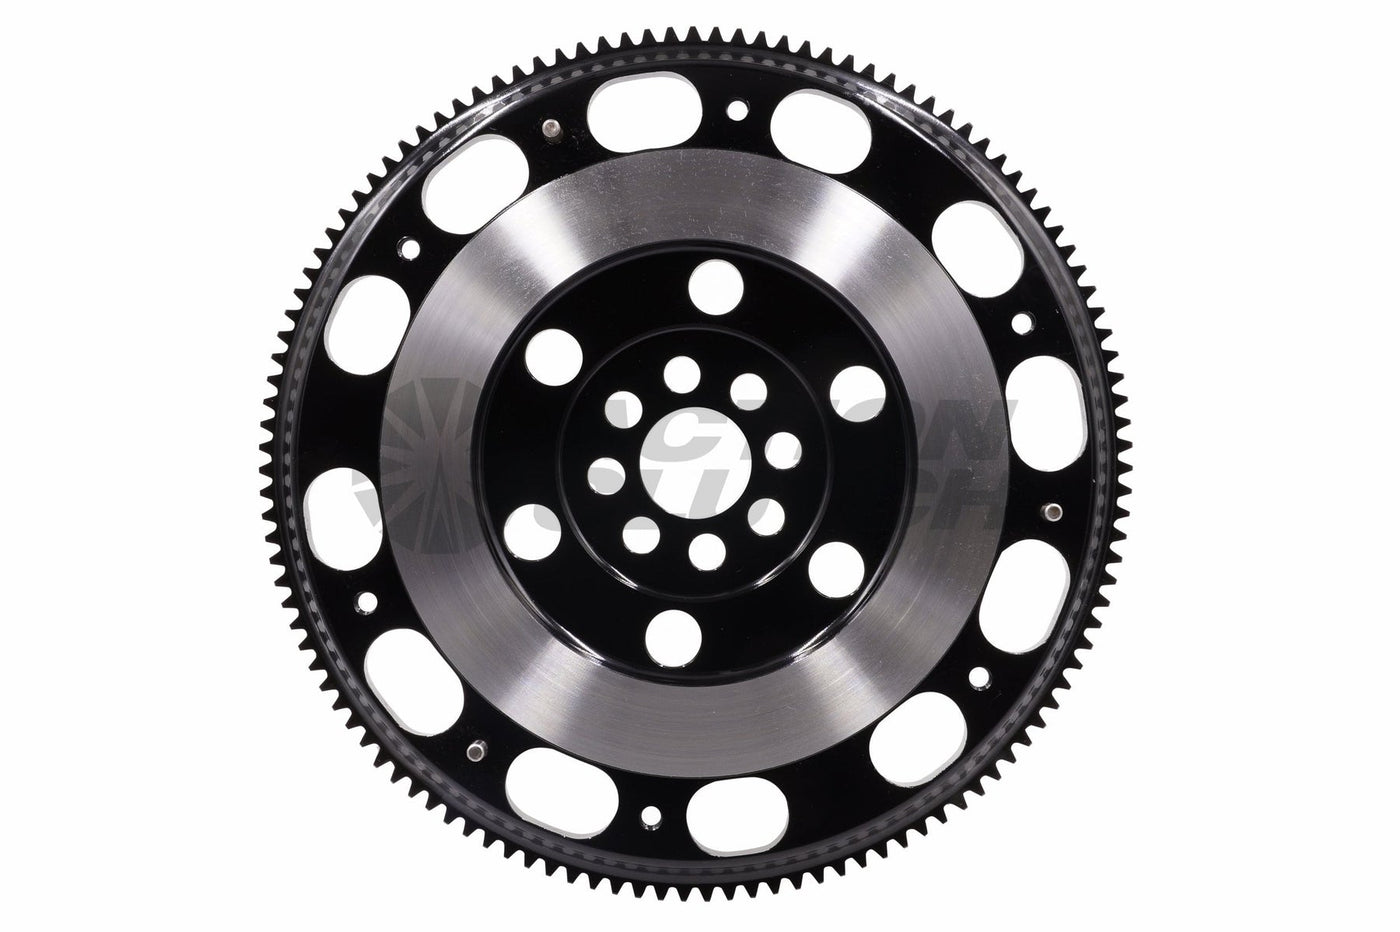 Chromoly Lightweight Flywheel for Mazda RX-7 1986-1988 1.3L (13B-RE) Turbo without Counterweight